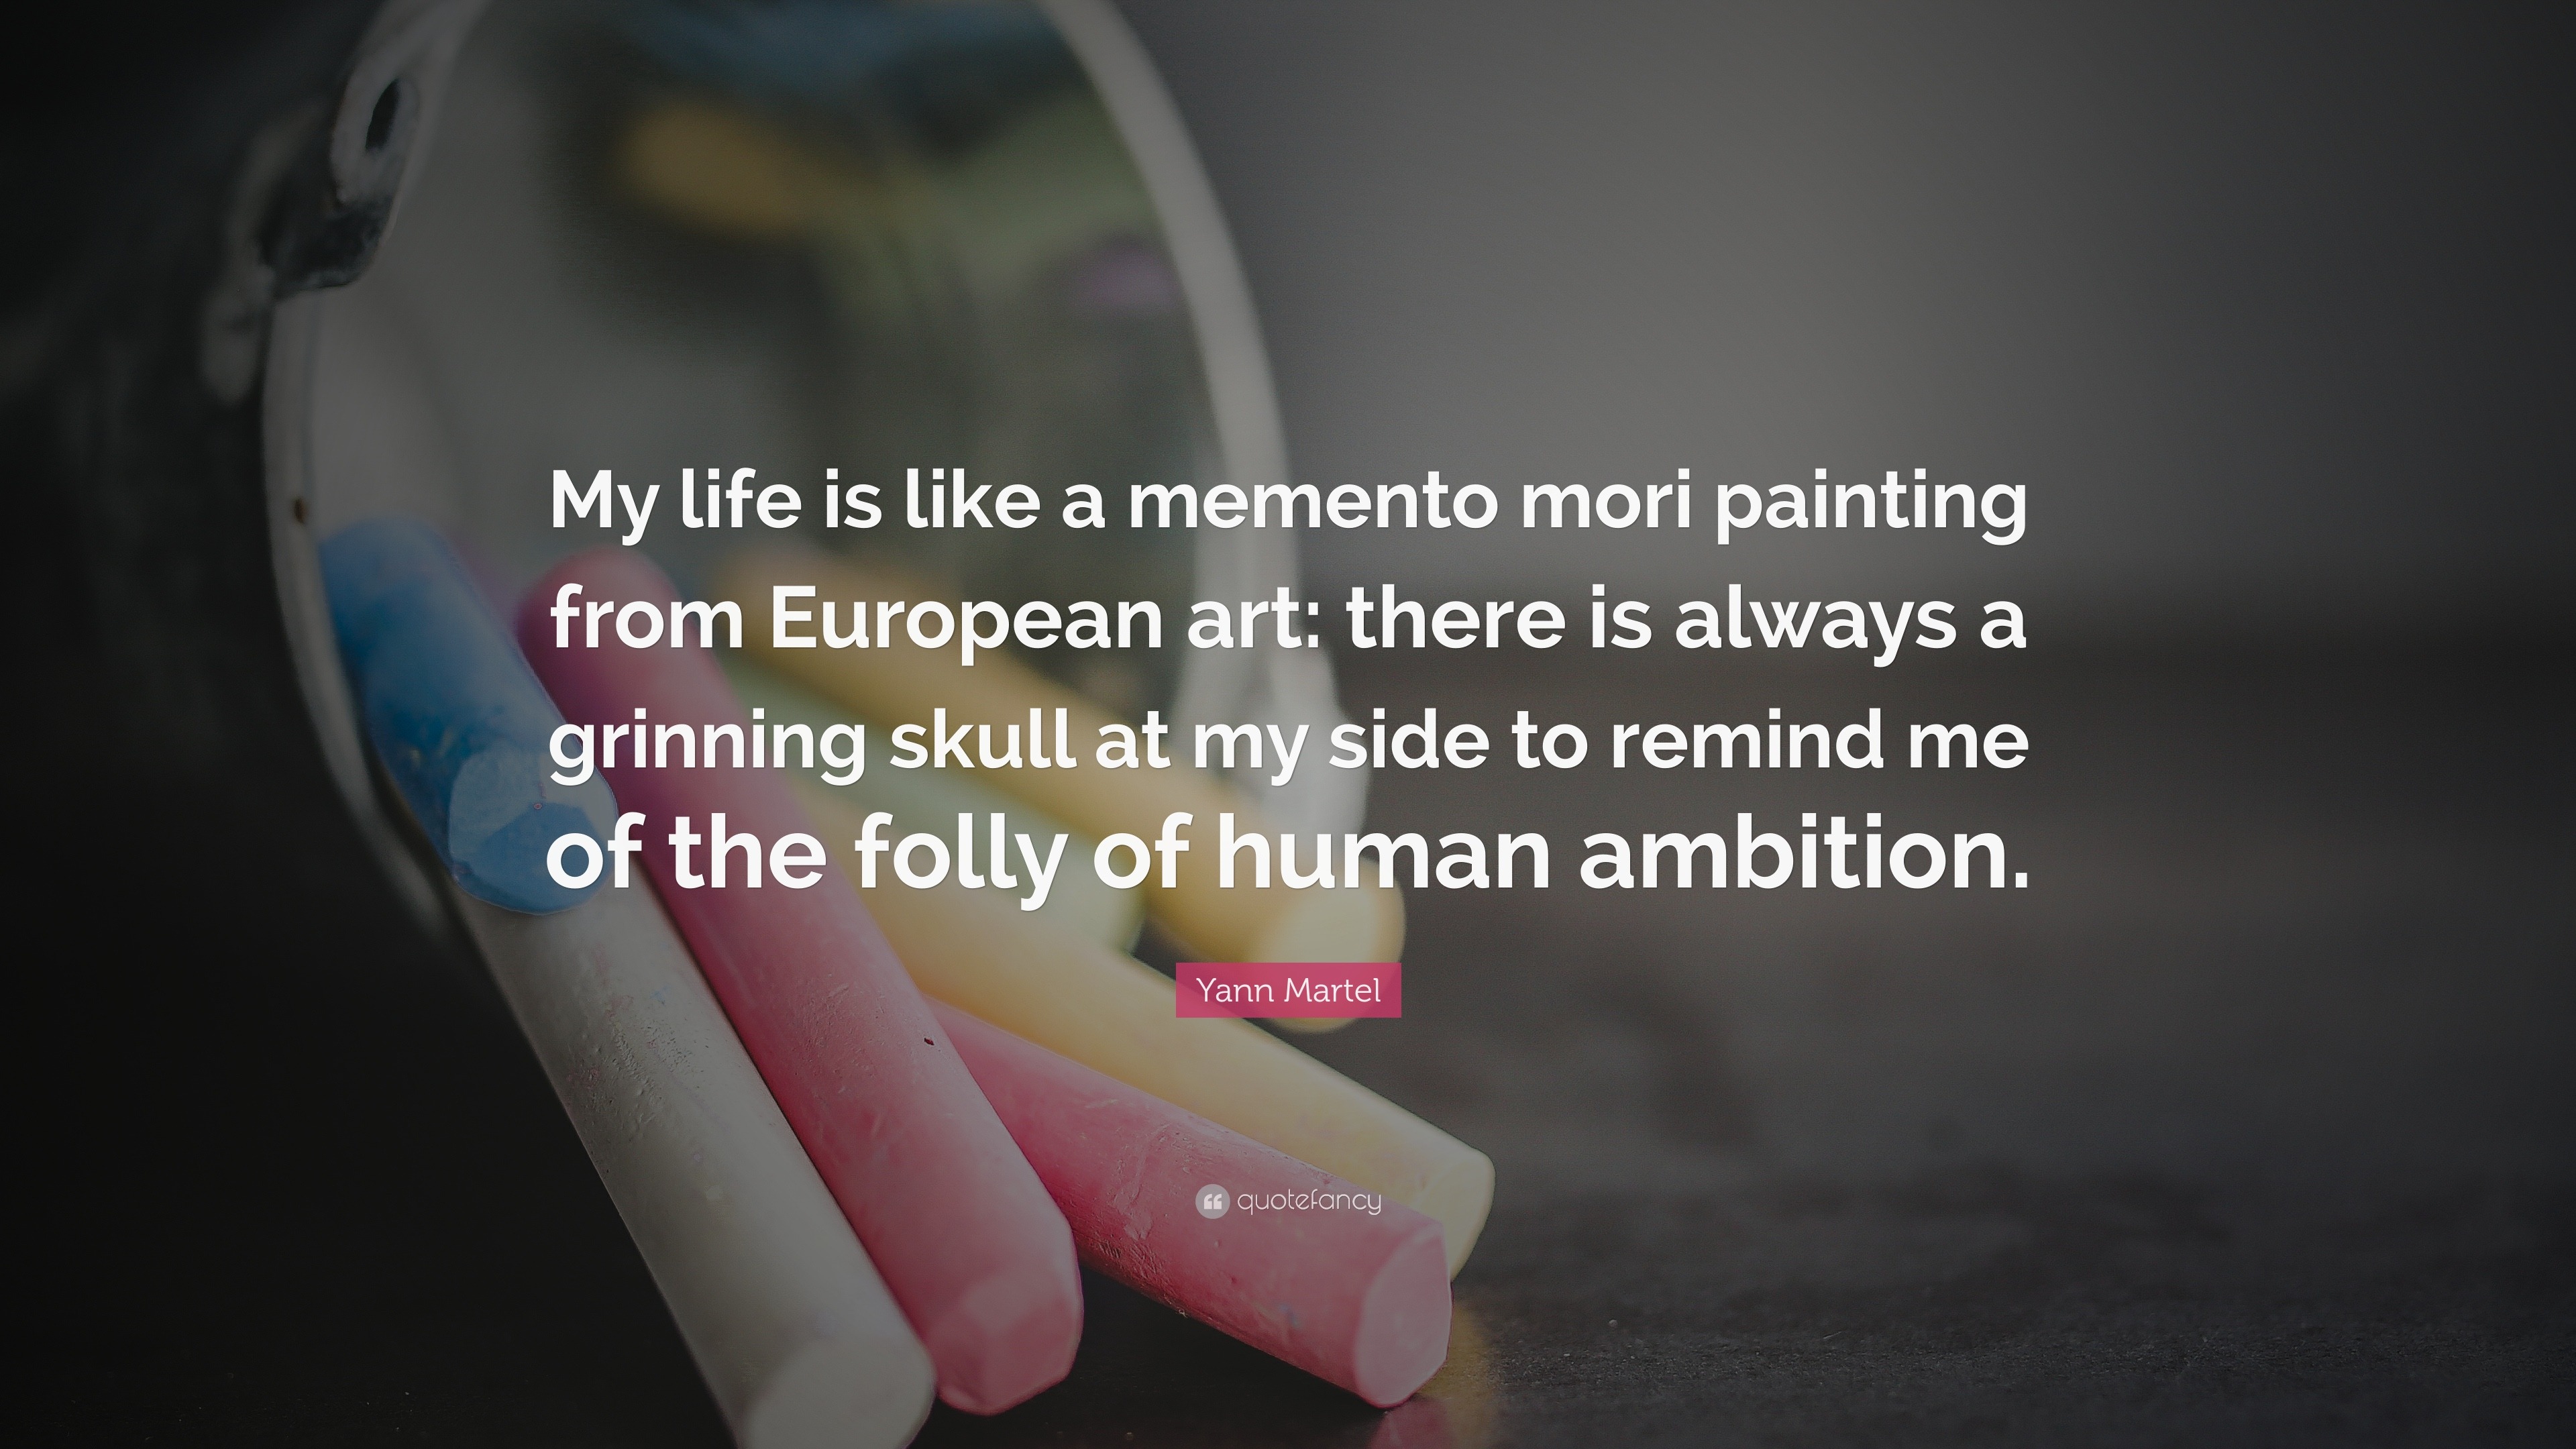 Yann Martel Quote “My life is like a memento mori painting from European art